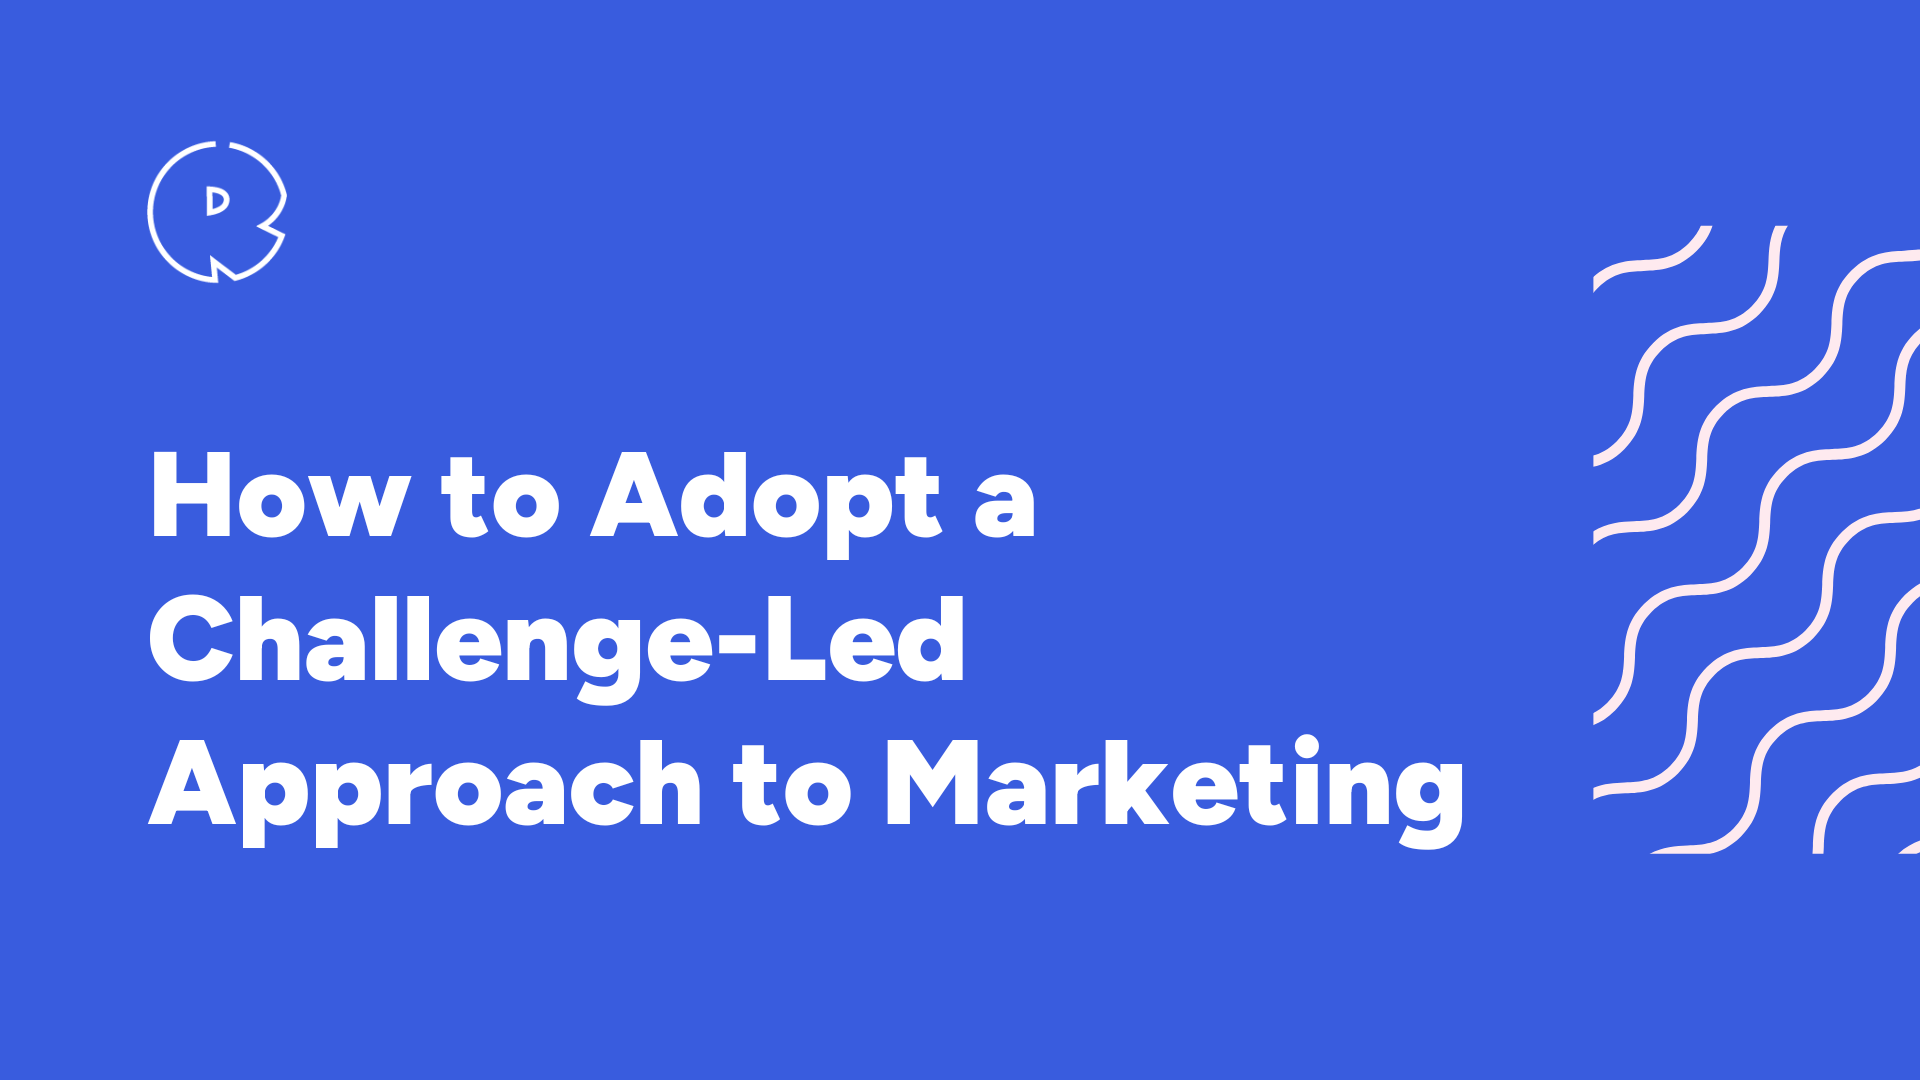 How to Adopt a Challenge-Led Approach to Marketing